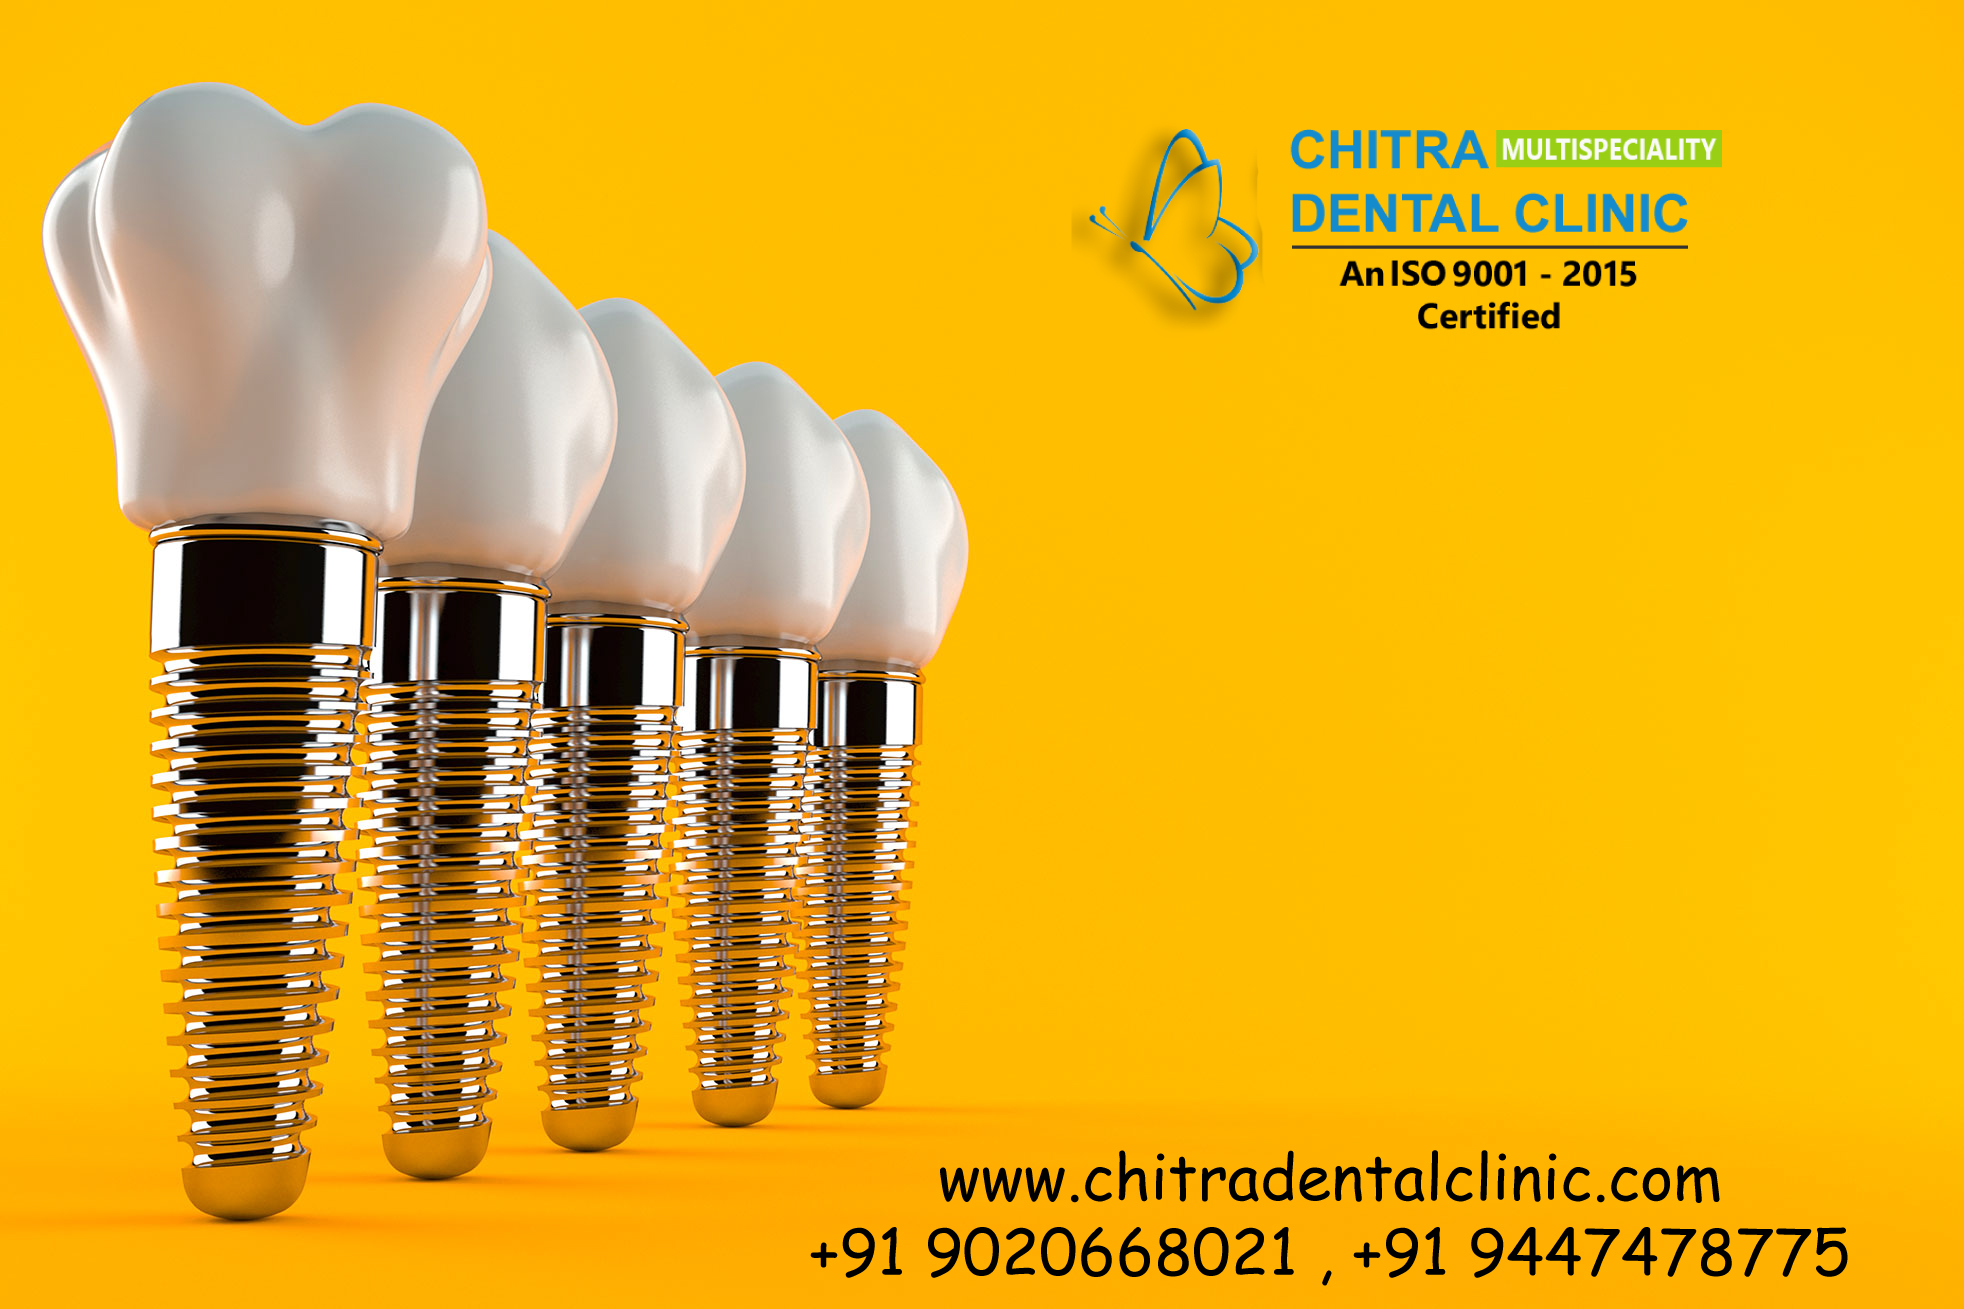 Chitra Dental Clinic in Trivandrum